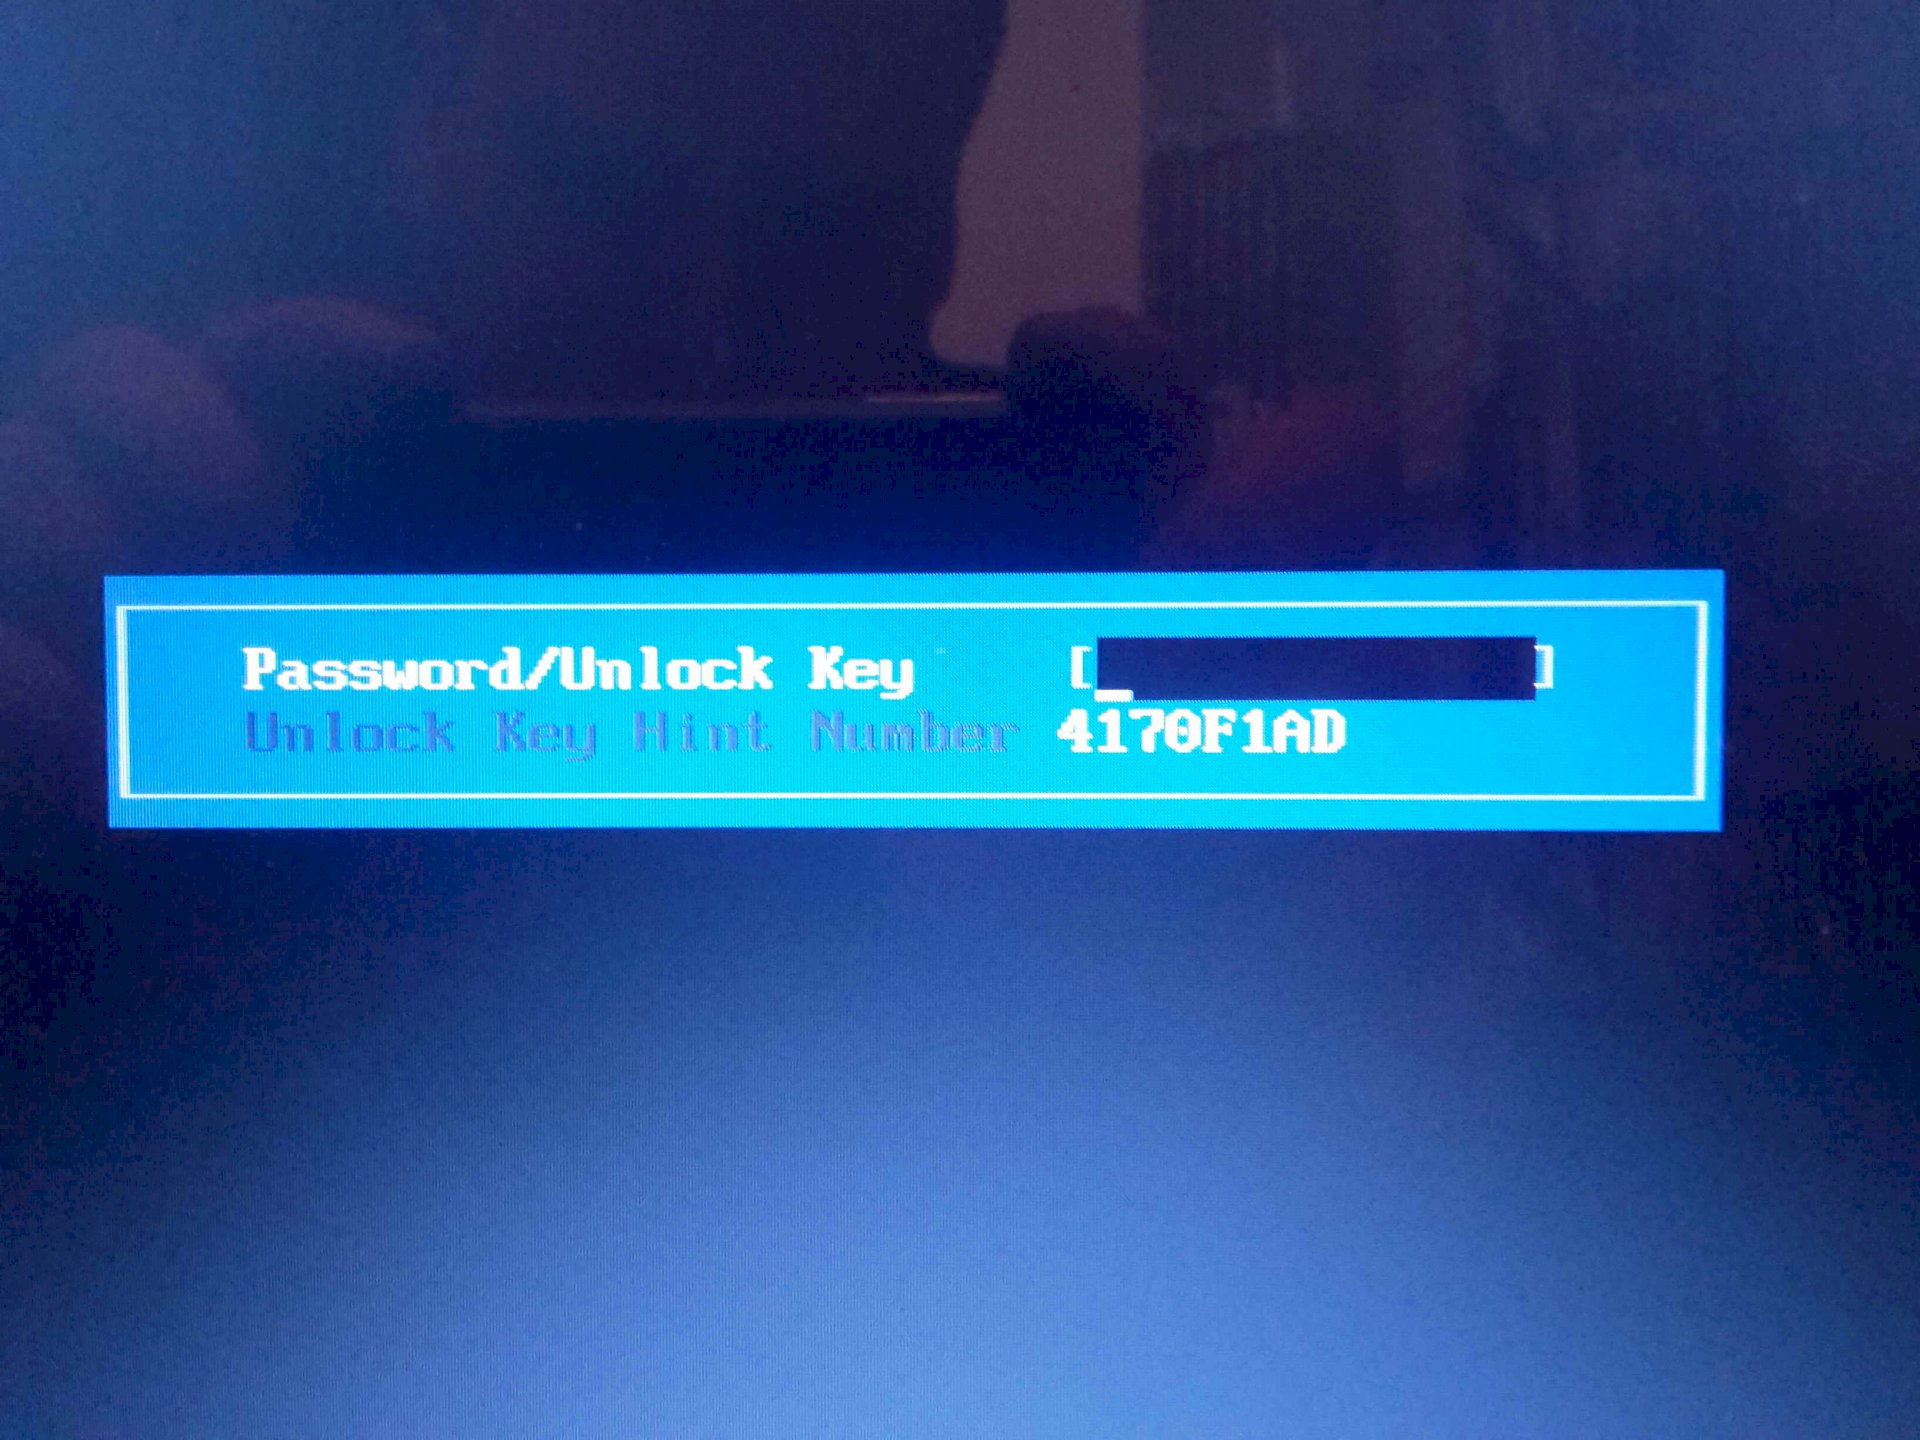 Laptop Acer V5-531. Bios locked. How can I cancel the lock